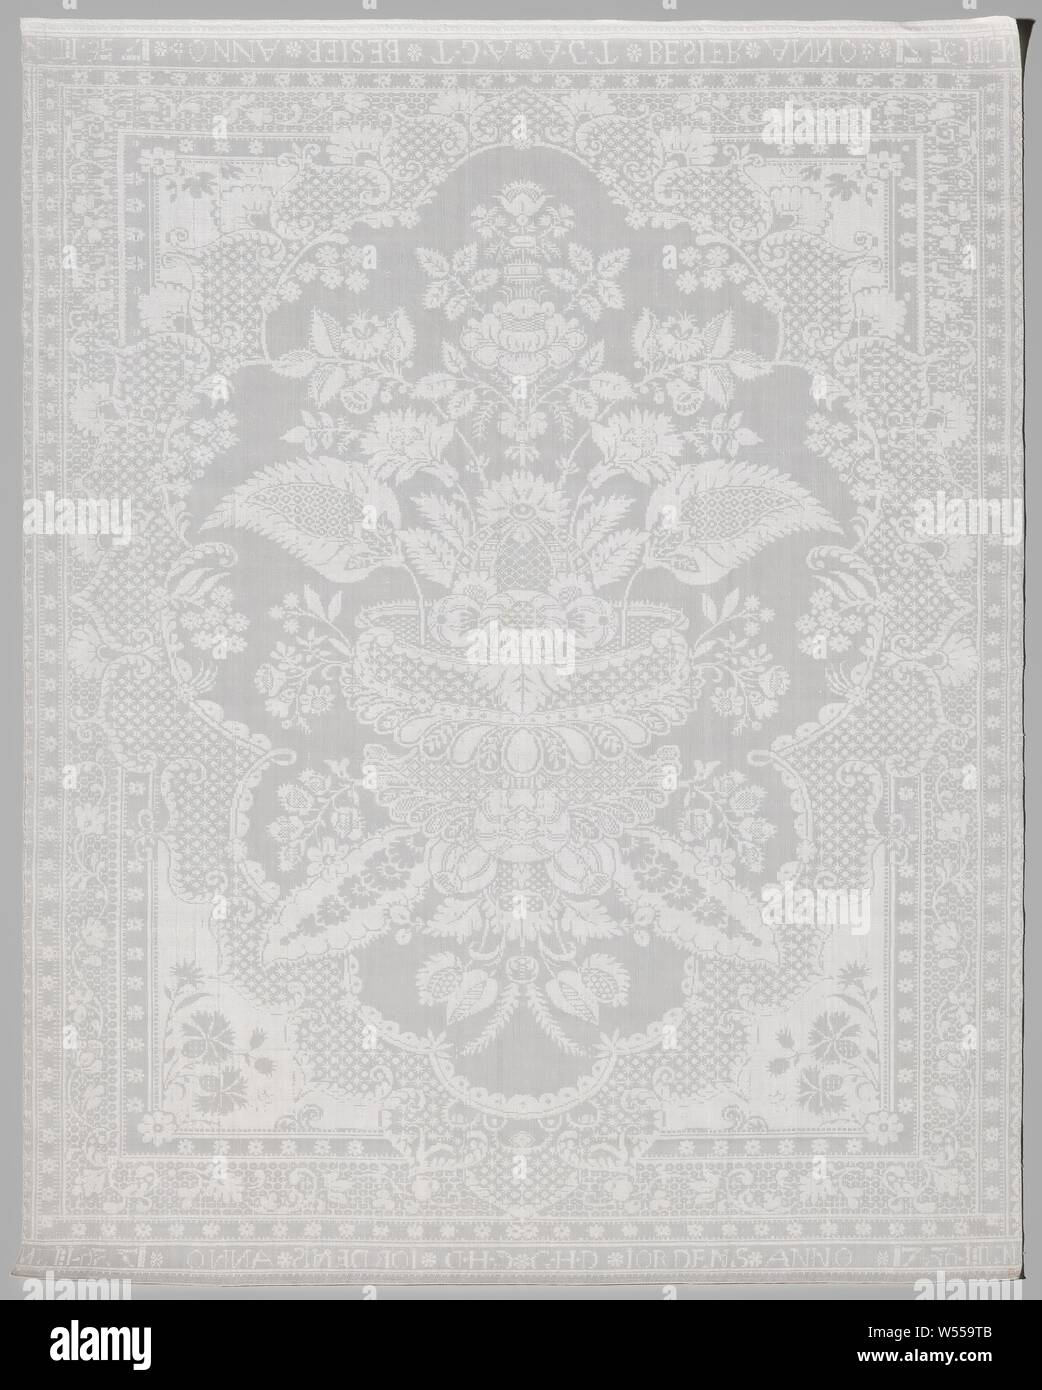 Napkin of linen damask with a lace pattern, White linen damask napkin, decorated with 'lace' pattern and woven AGT BESIER ANNO 1736 and GHD IORDENS ANNO 1736., anonymous, Southern Netherlands (possibly), 1736, linen (material), damask, h 114 cm × w 88 cm Stock Photo